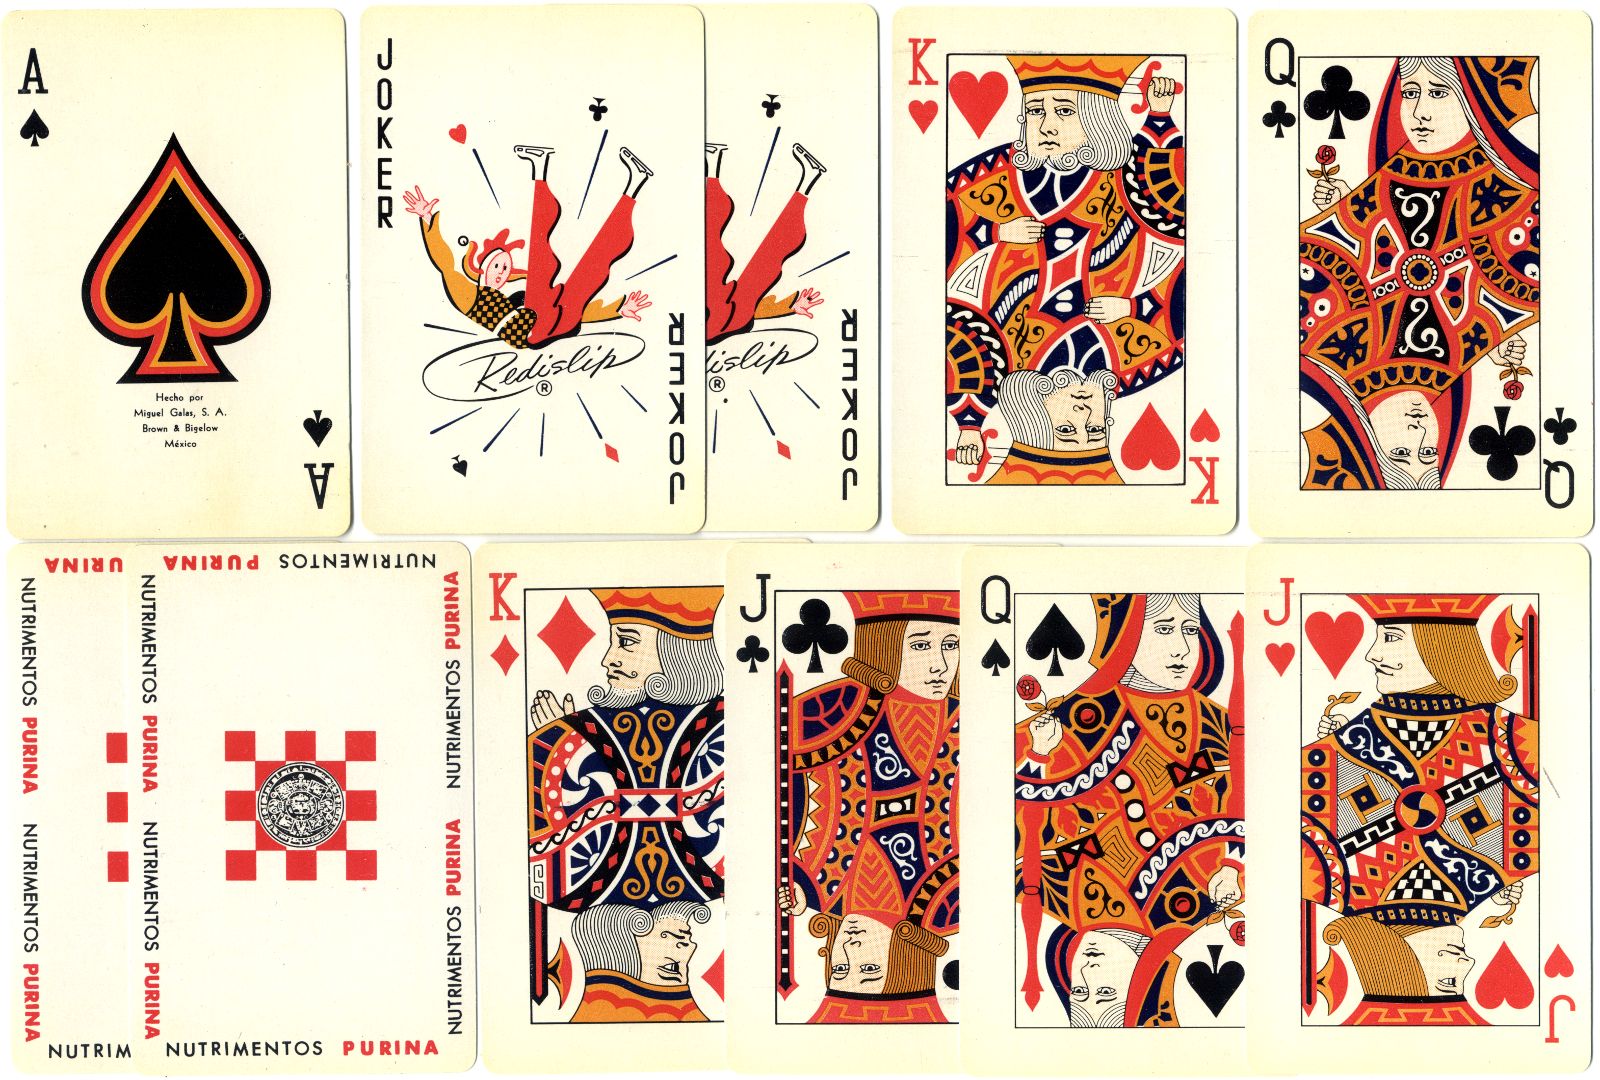 Nutrimientos Purina playing cards by Miguel Galas S.A. (Brown & Bigelow), Mexico